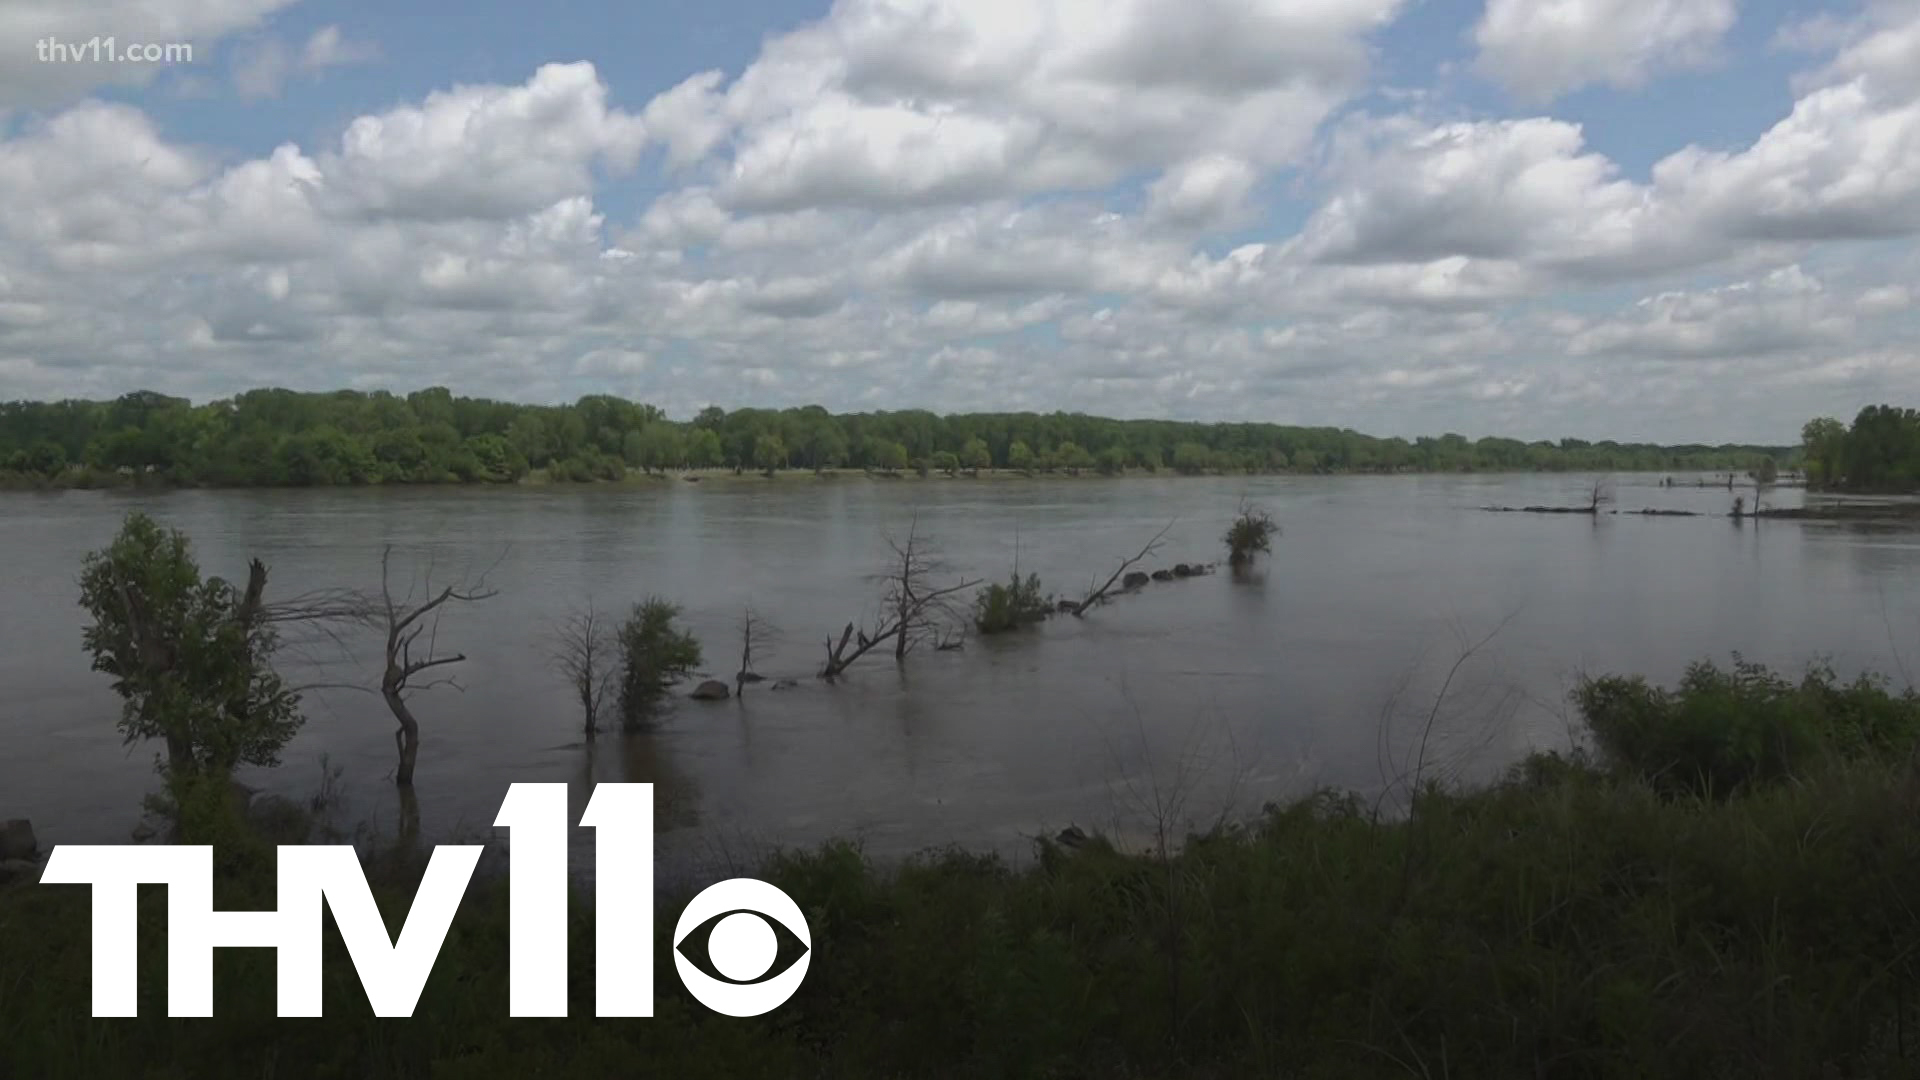 With water levels rising, Jay Townsend with the Army Corps of Engineers advises people to stay away from the Arkansas River this upcoming Memorial Day weekend.